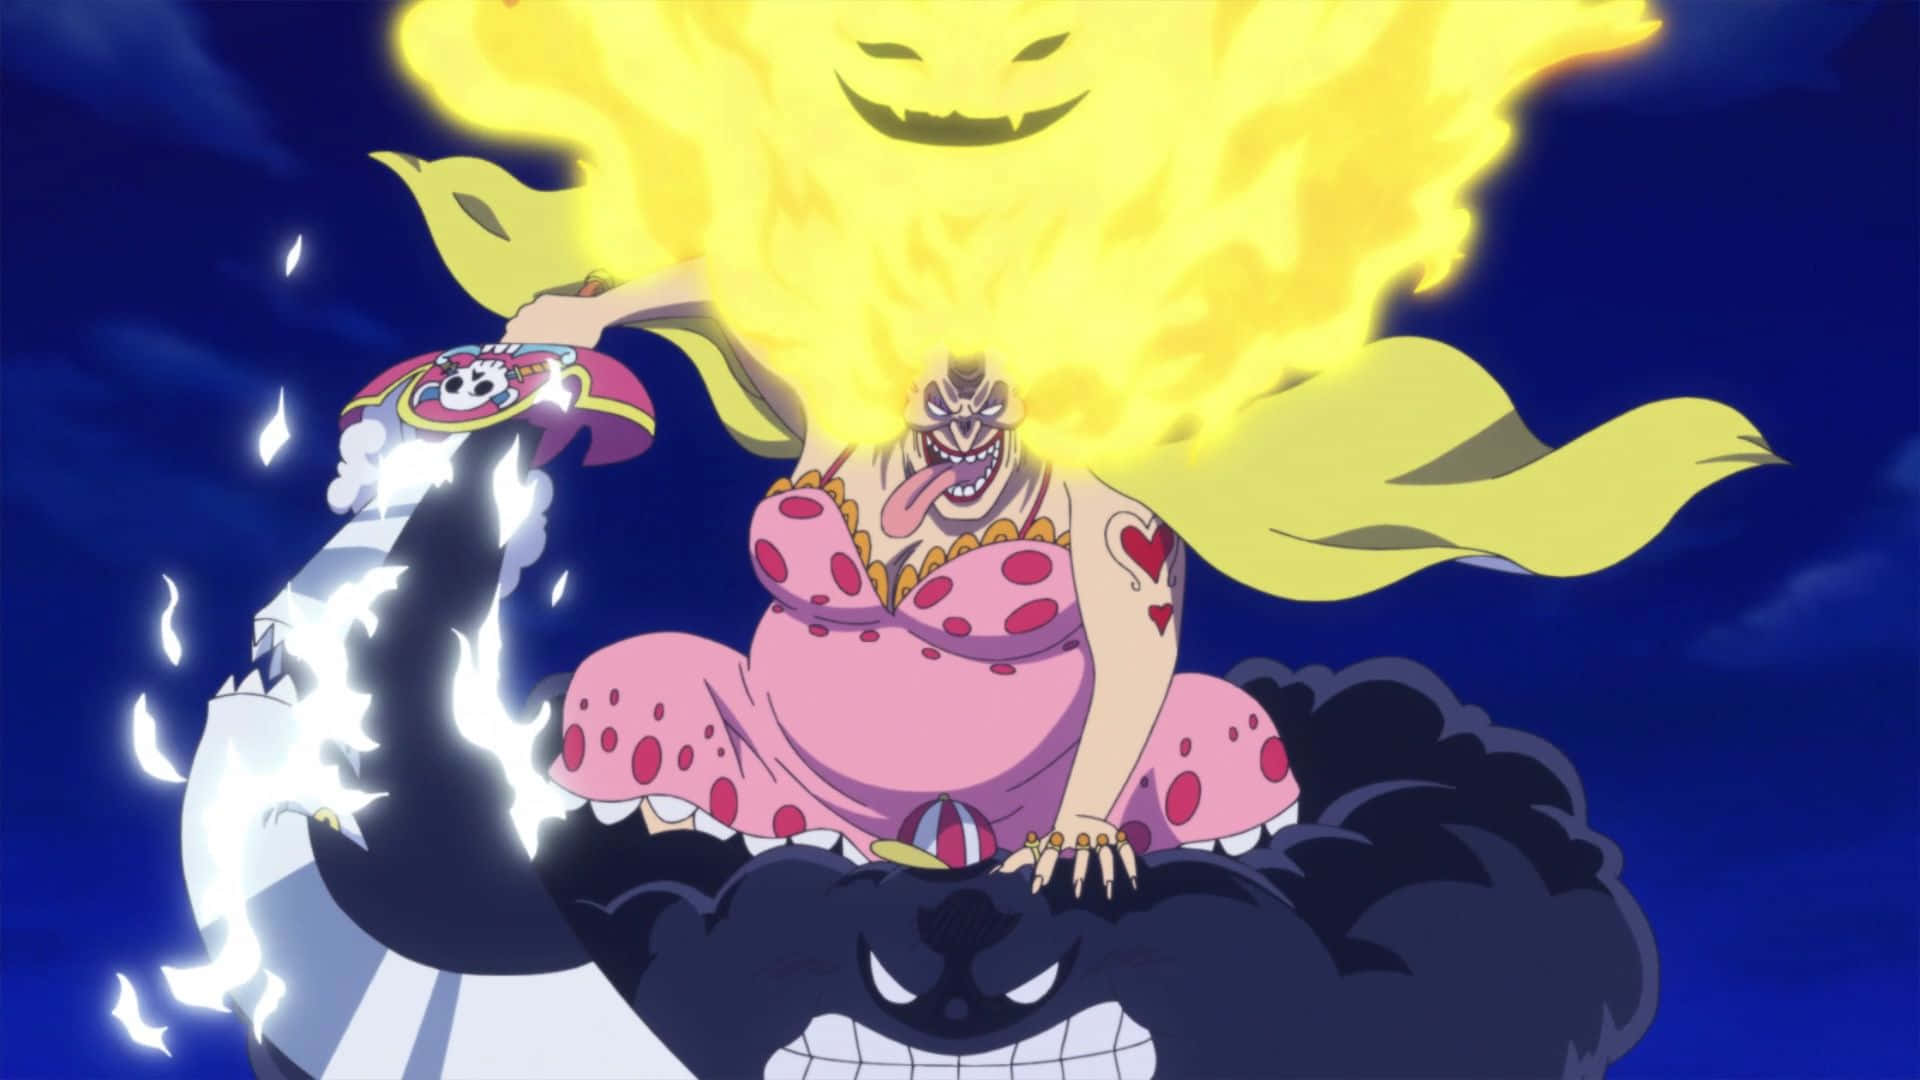 Big Mom rules the seas in One Piece Wallpaper